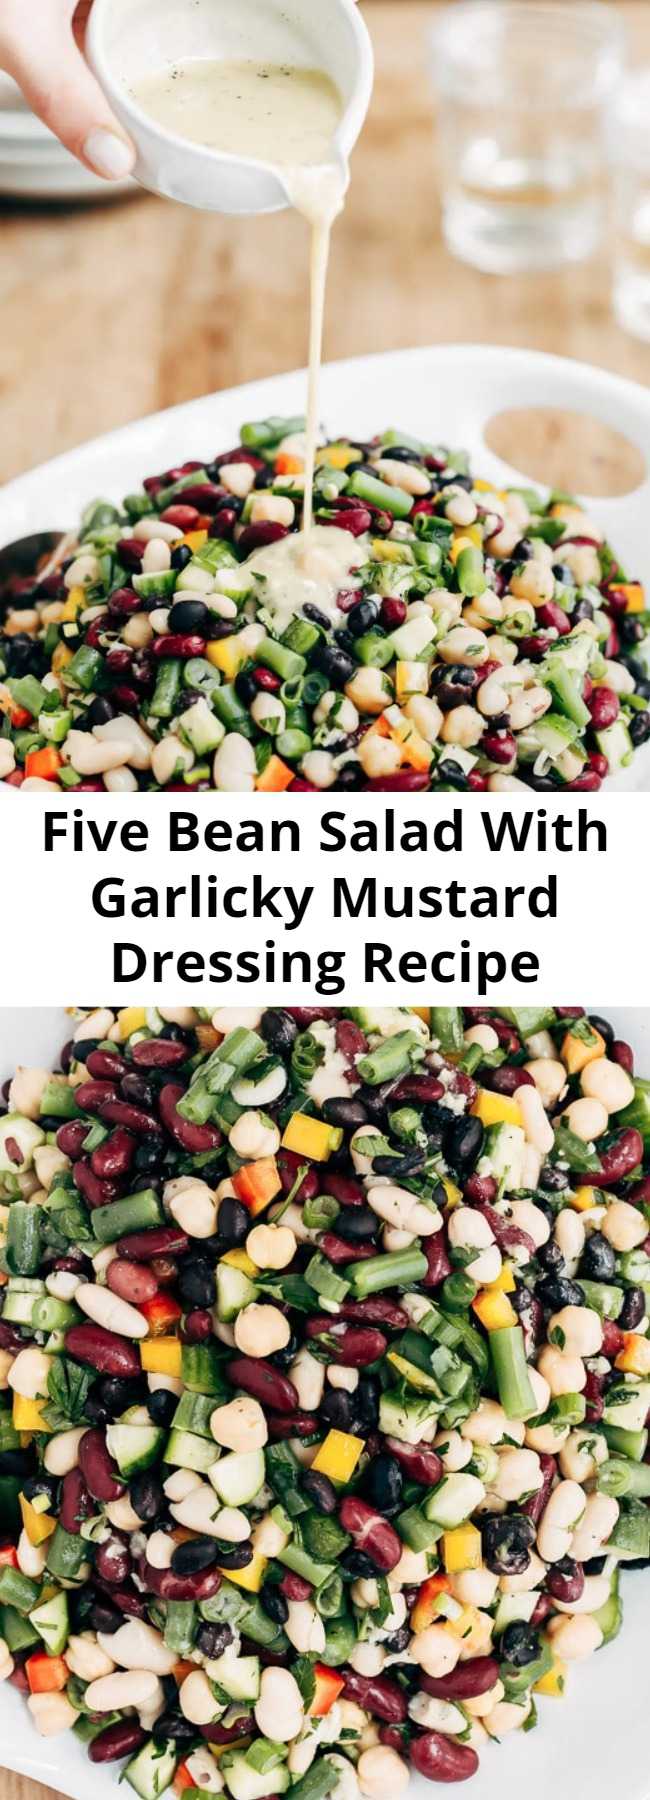 Five Bean Salad With Garlicky Mustard Dressing Recipe - Whether you make it for a picnic, potluck, or a weeknight dinner at home as a side dish, this Five Bean Salad is guaranteed to impress. Flavored with homemade garlicky mustard dressing, it comes together in 20 minutes, can be made ahead, and travels well.